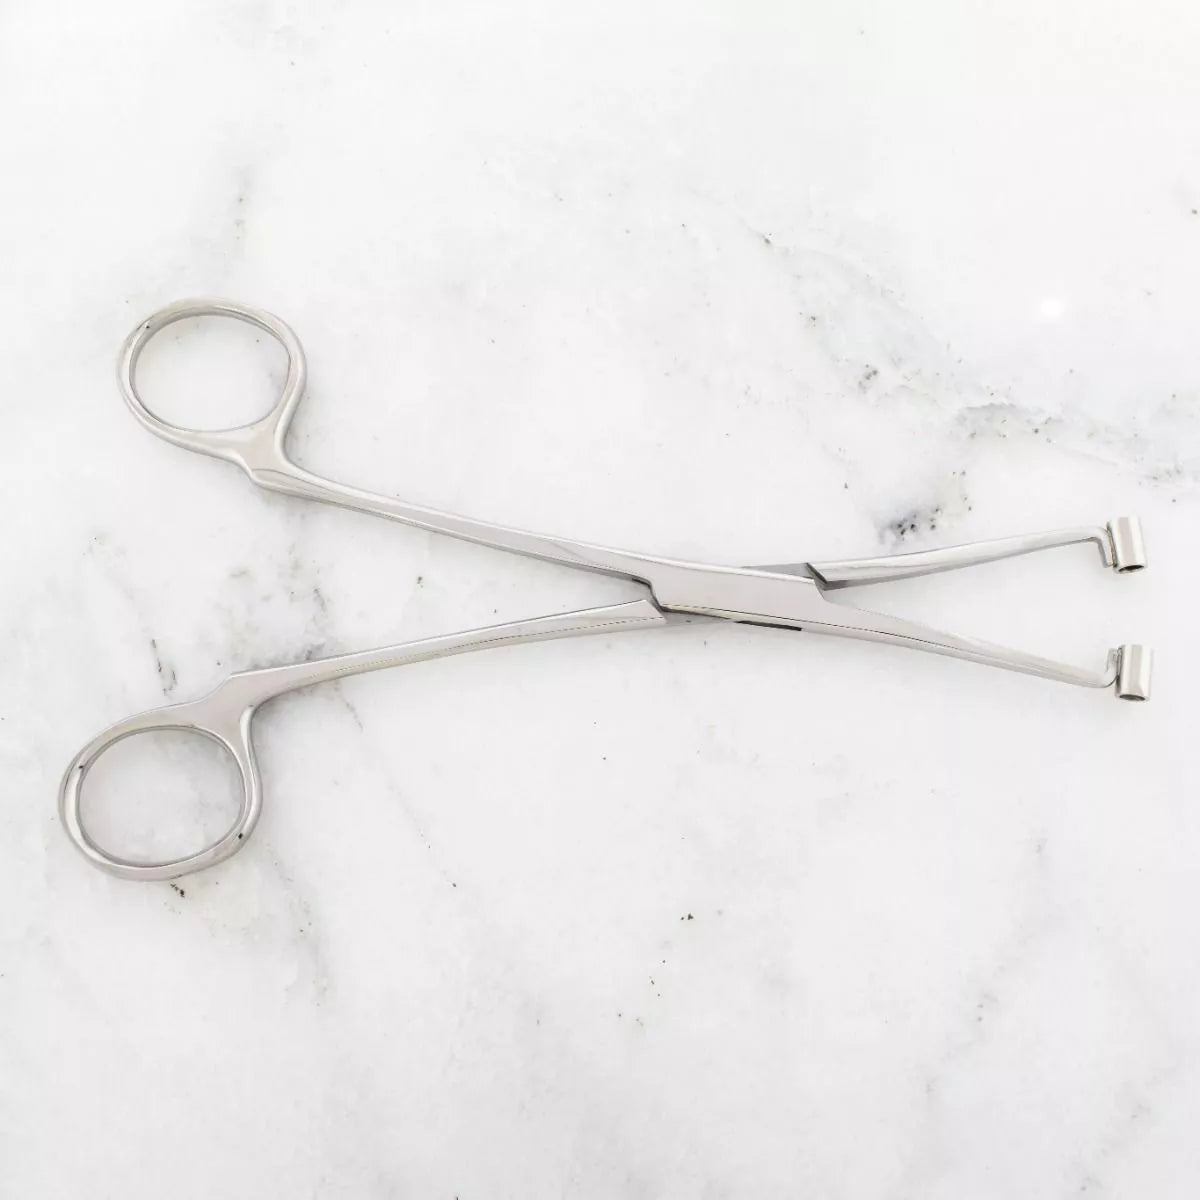 Tools 6" Long High Grade 410 Surgical Steel Septum Forceps. Tubes Are Big Enough to Allow a 10g Needle to Pass Through w/ Ease.  - 1 Piece -Rebel Bod-RebelBod